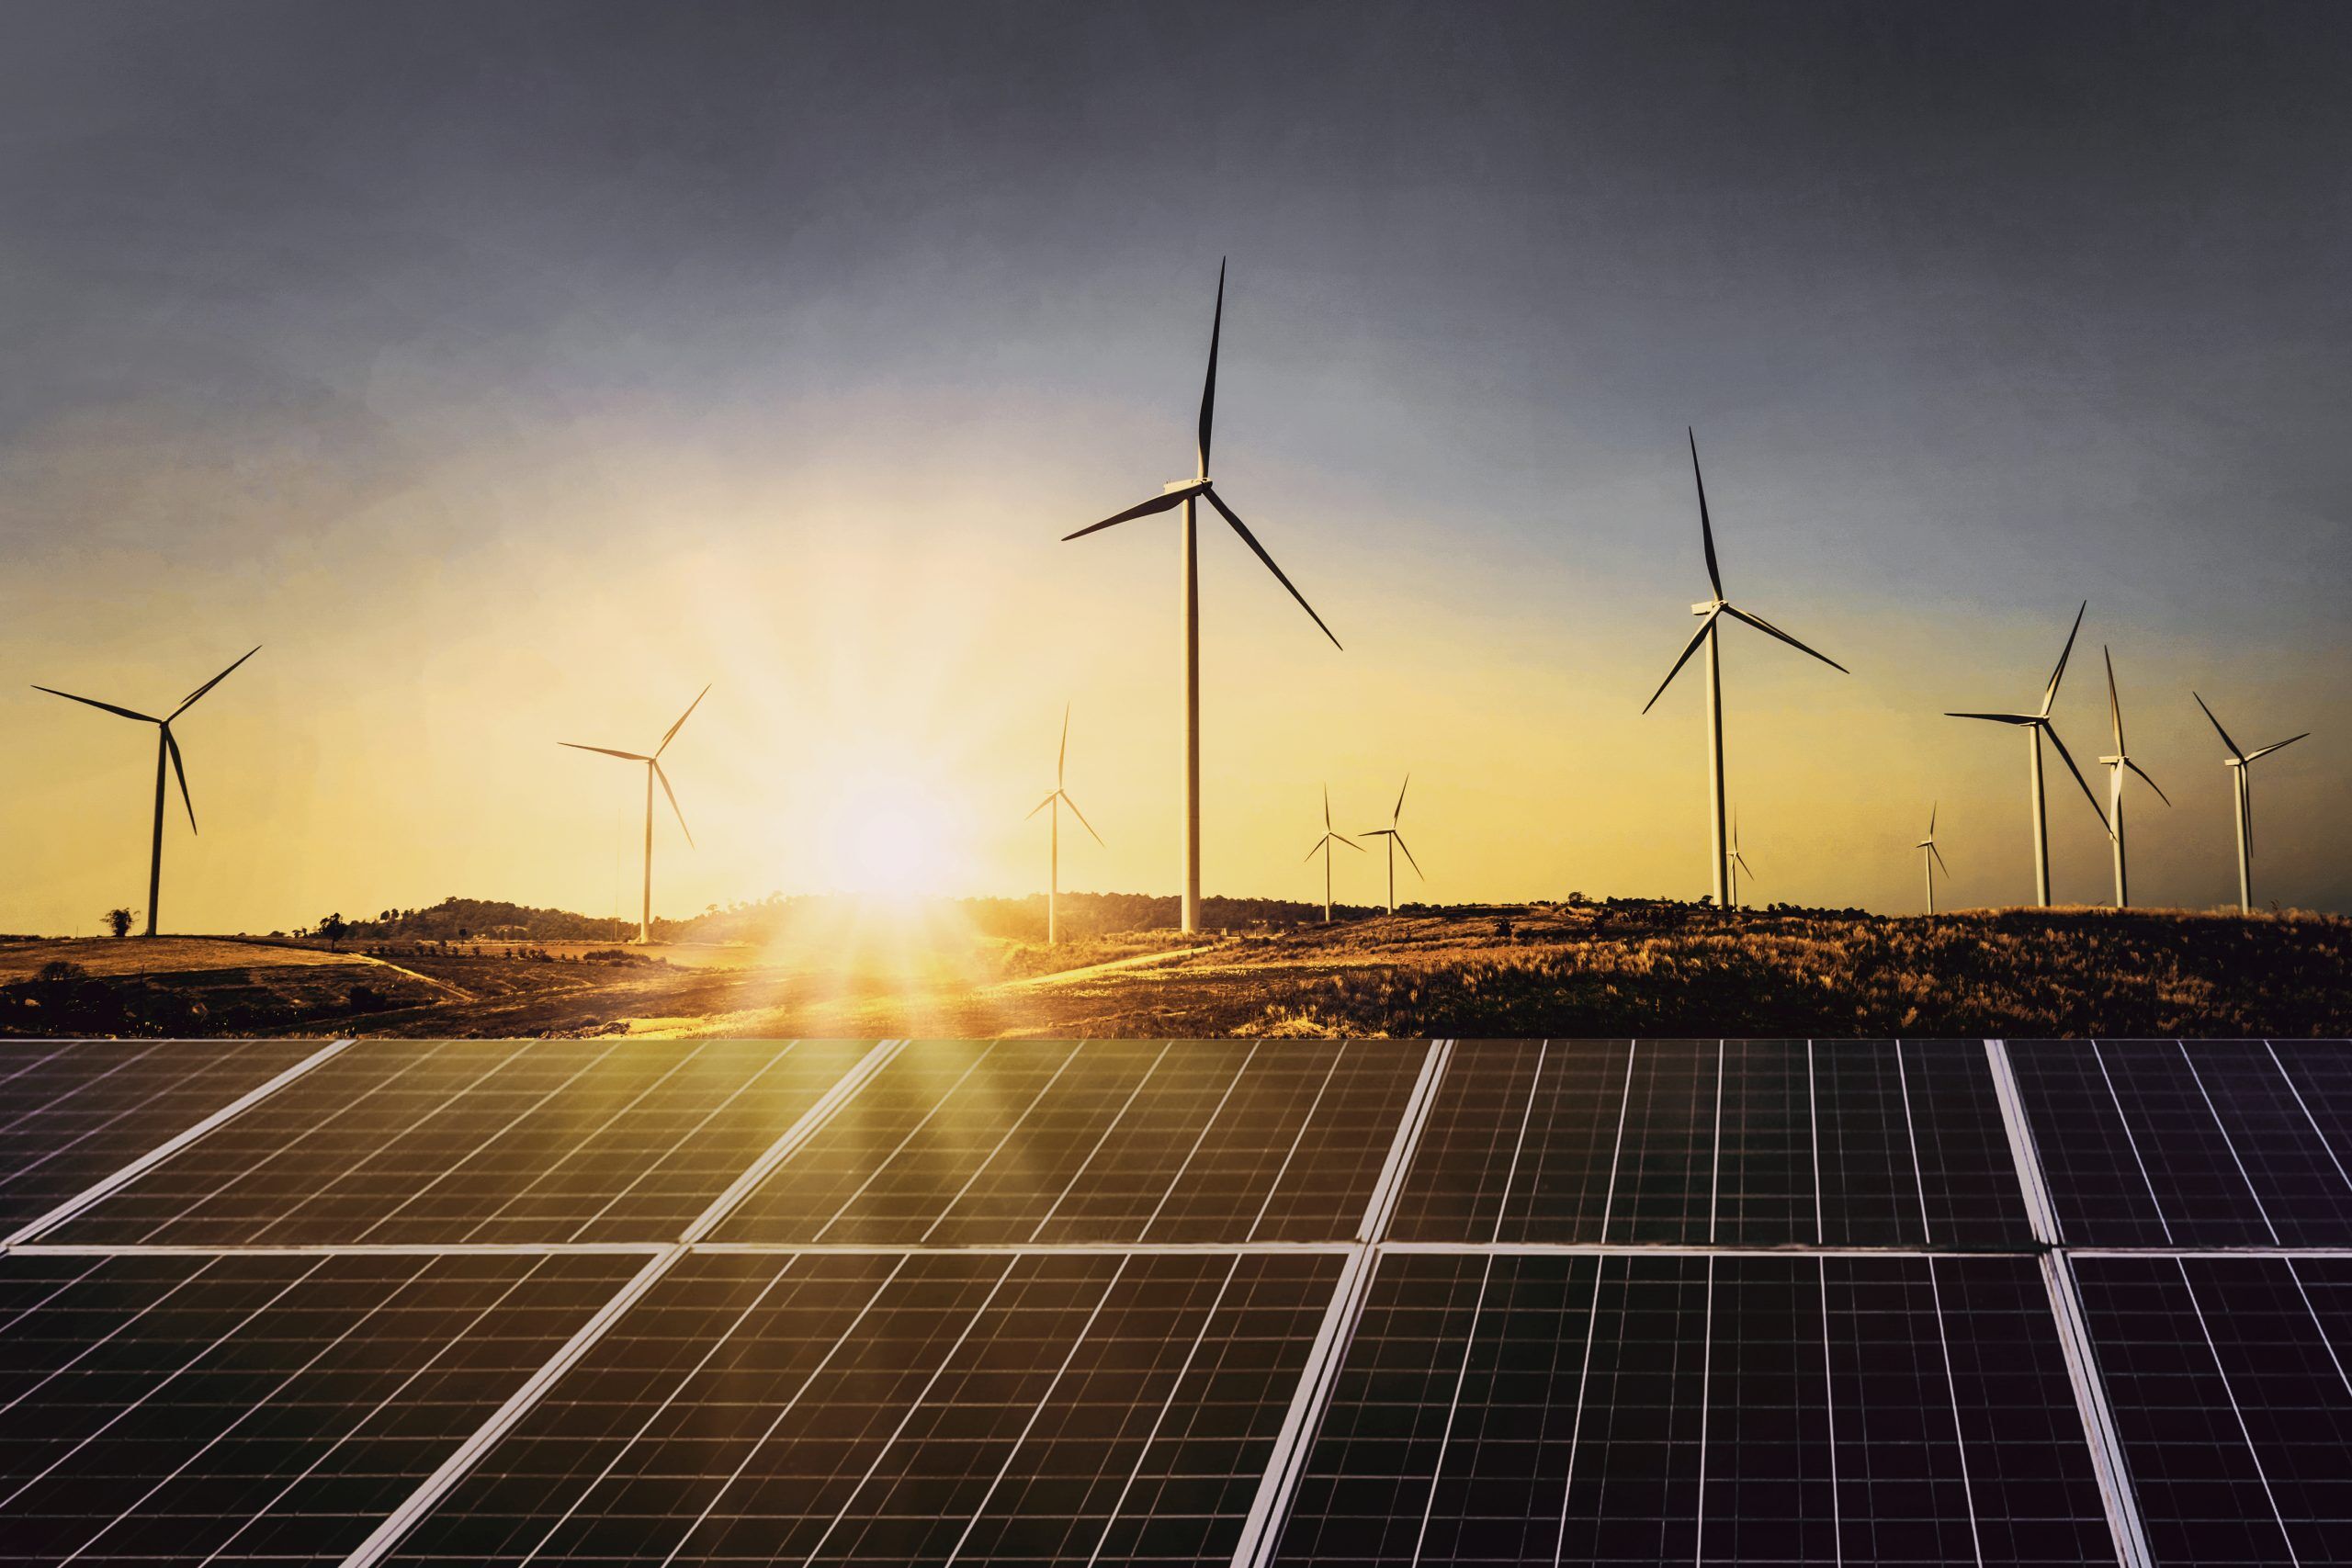 3.40 Trillion to be Invested Globally in Renewable Energy by 2030, Finds Frost & Sullivan